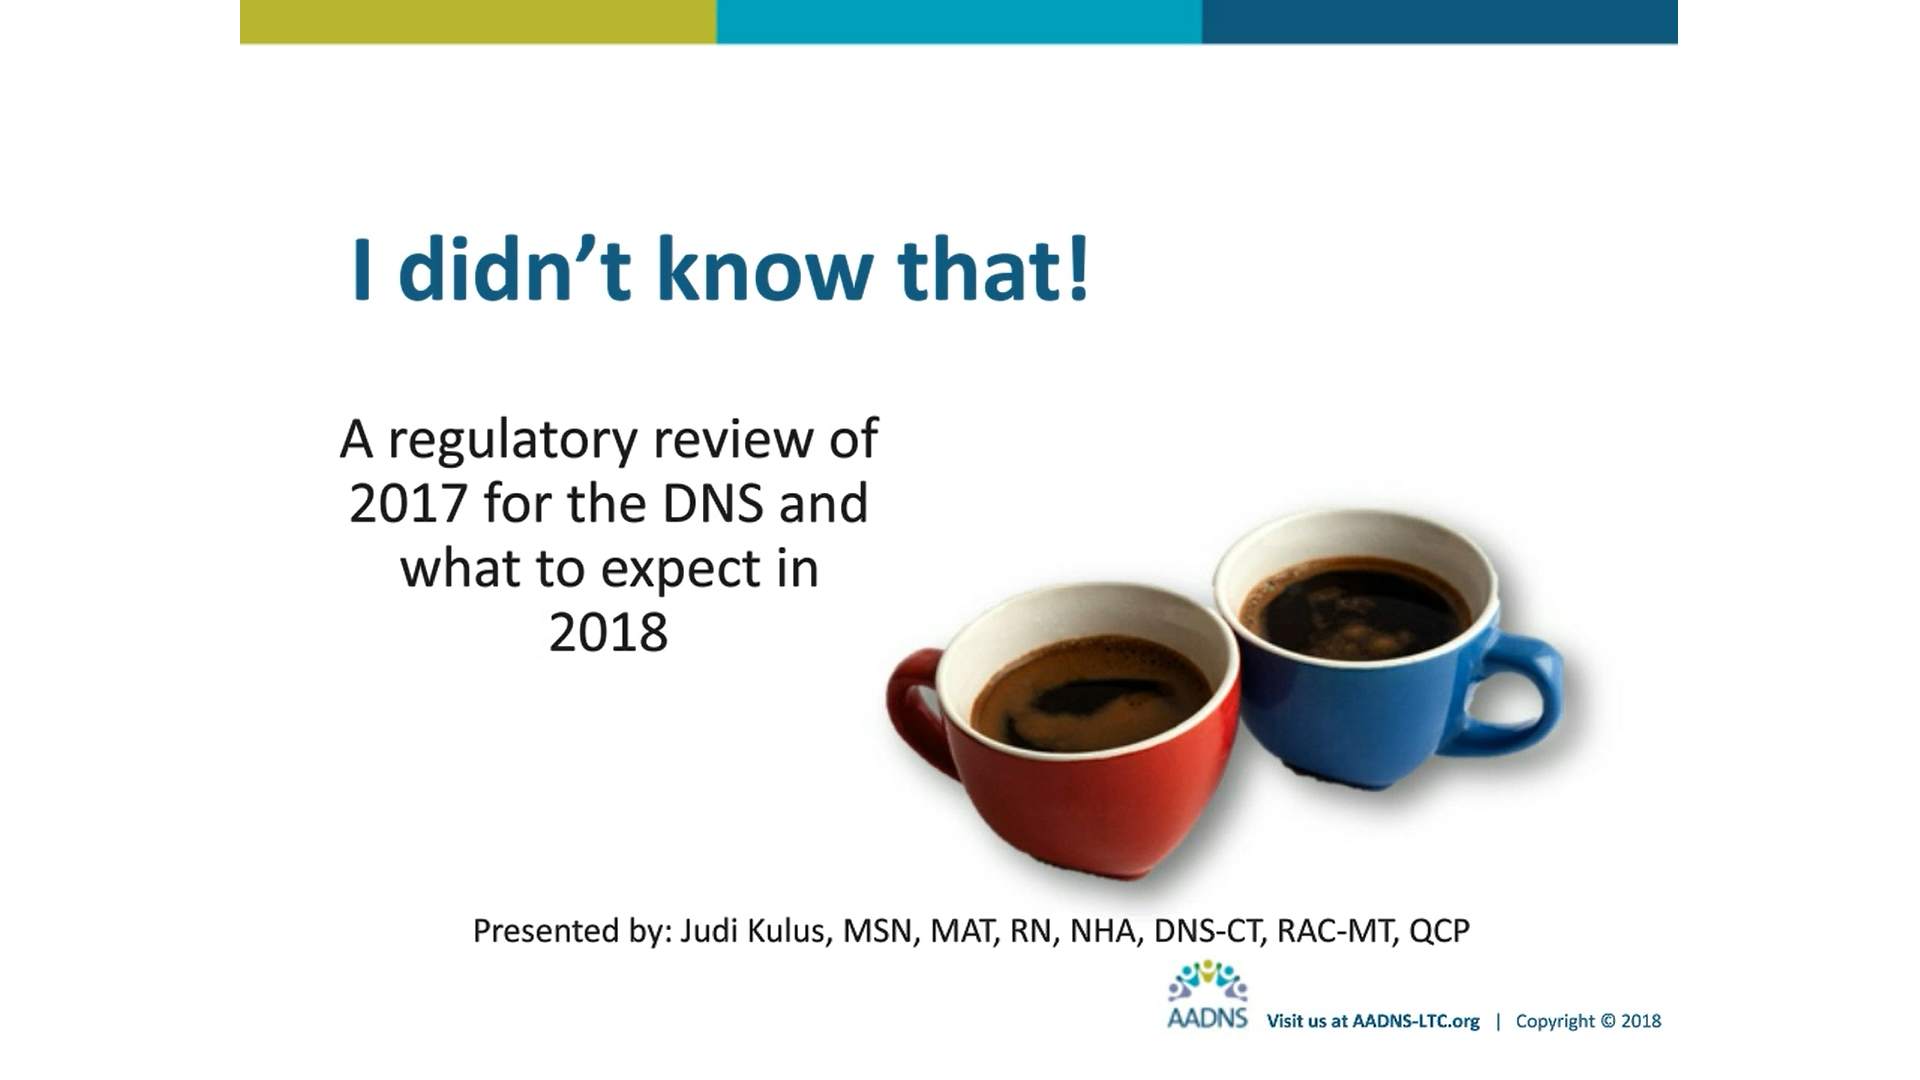 Screenshot of “I didn’t know that!” A regulatory review of 2017 for the DNS and what to expect in 2018 video